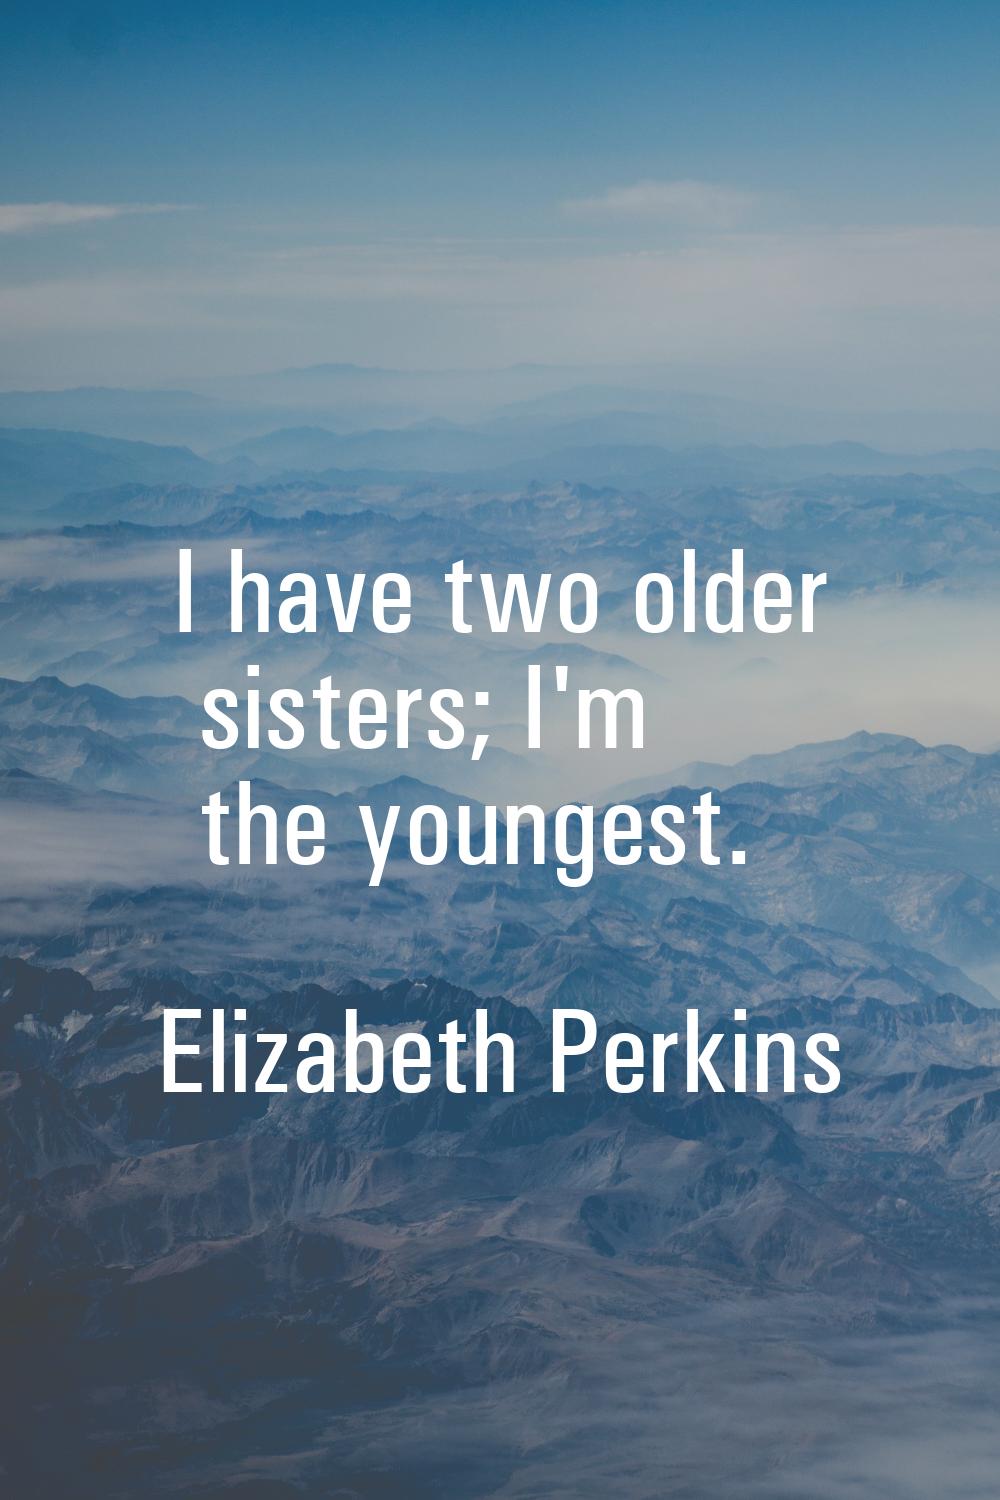 I have two older sisters; I'm the youngest.